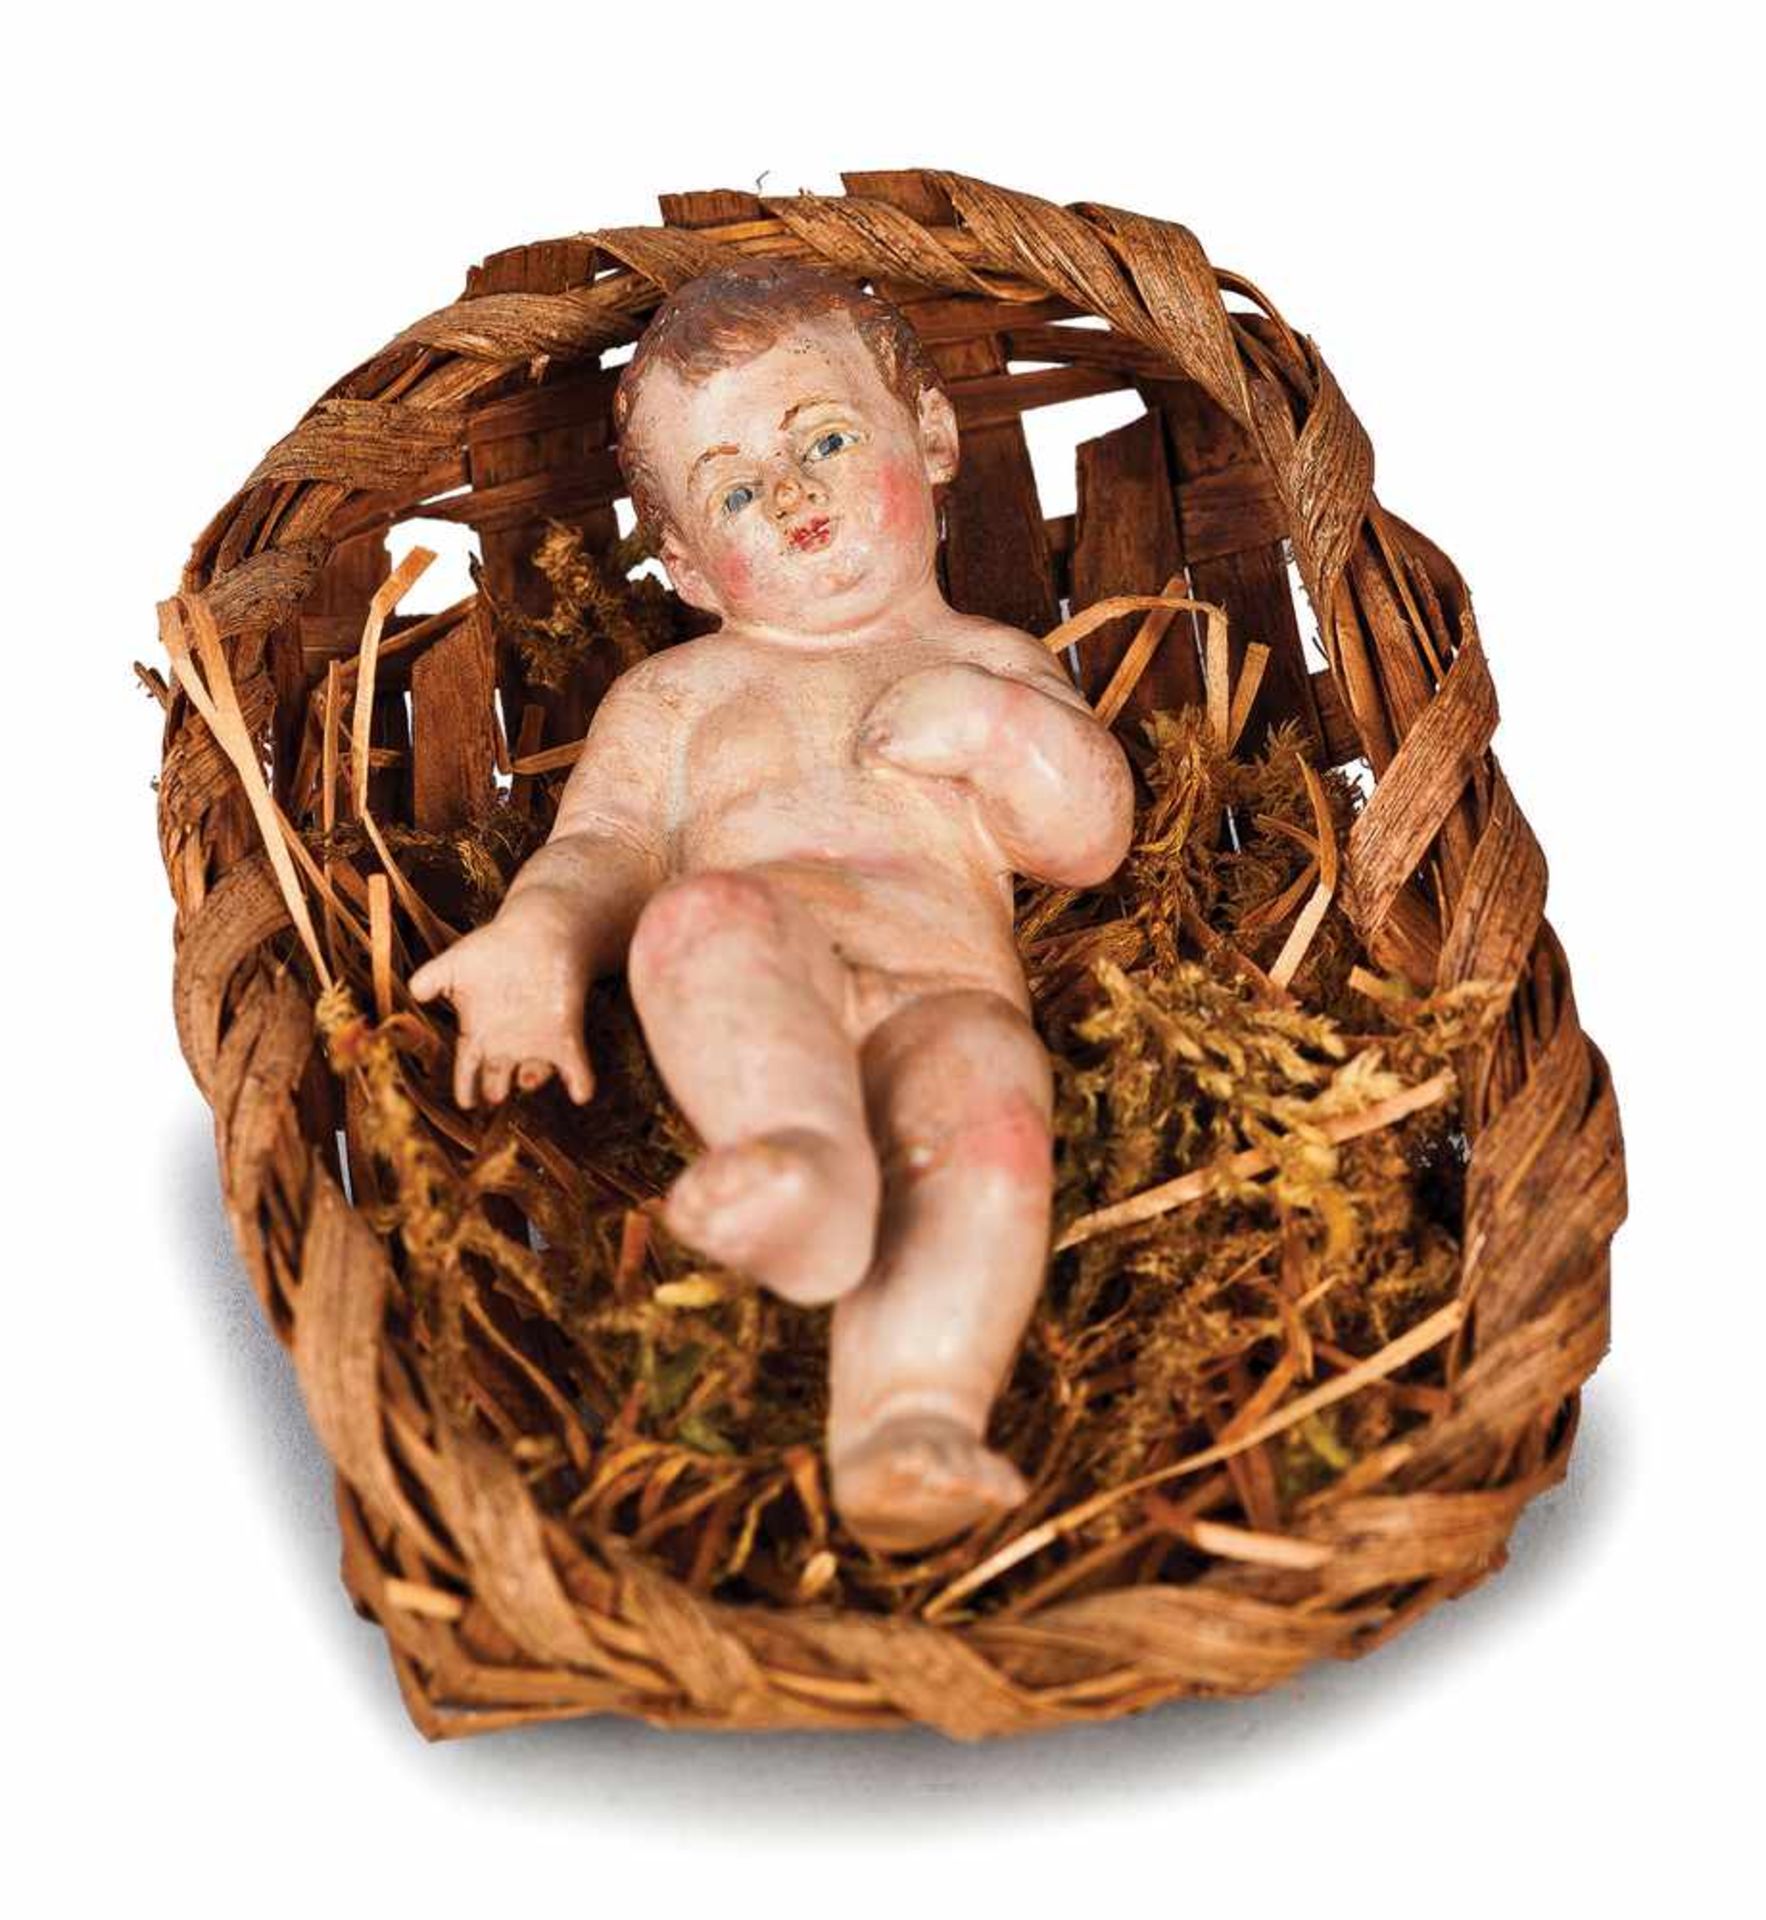 BAMBINELLO IN TERRACOTTA POLICROMA | HOLY CHILD IN TERRACOTTA Bambinello in terracotta policroma,